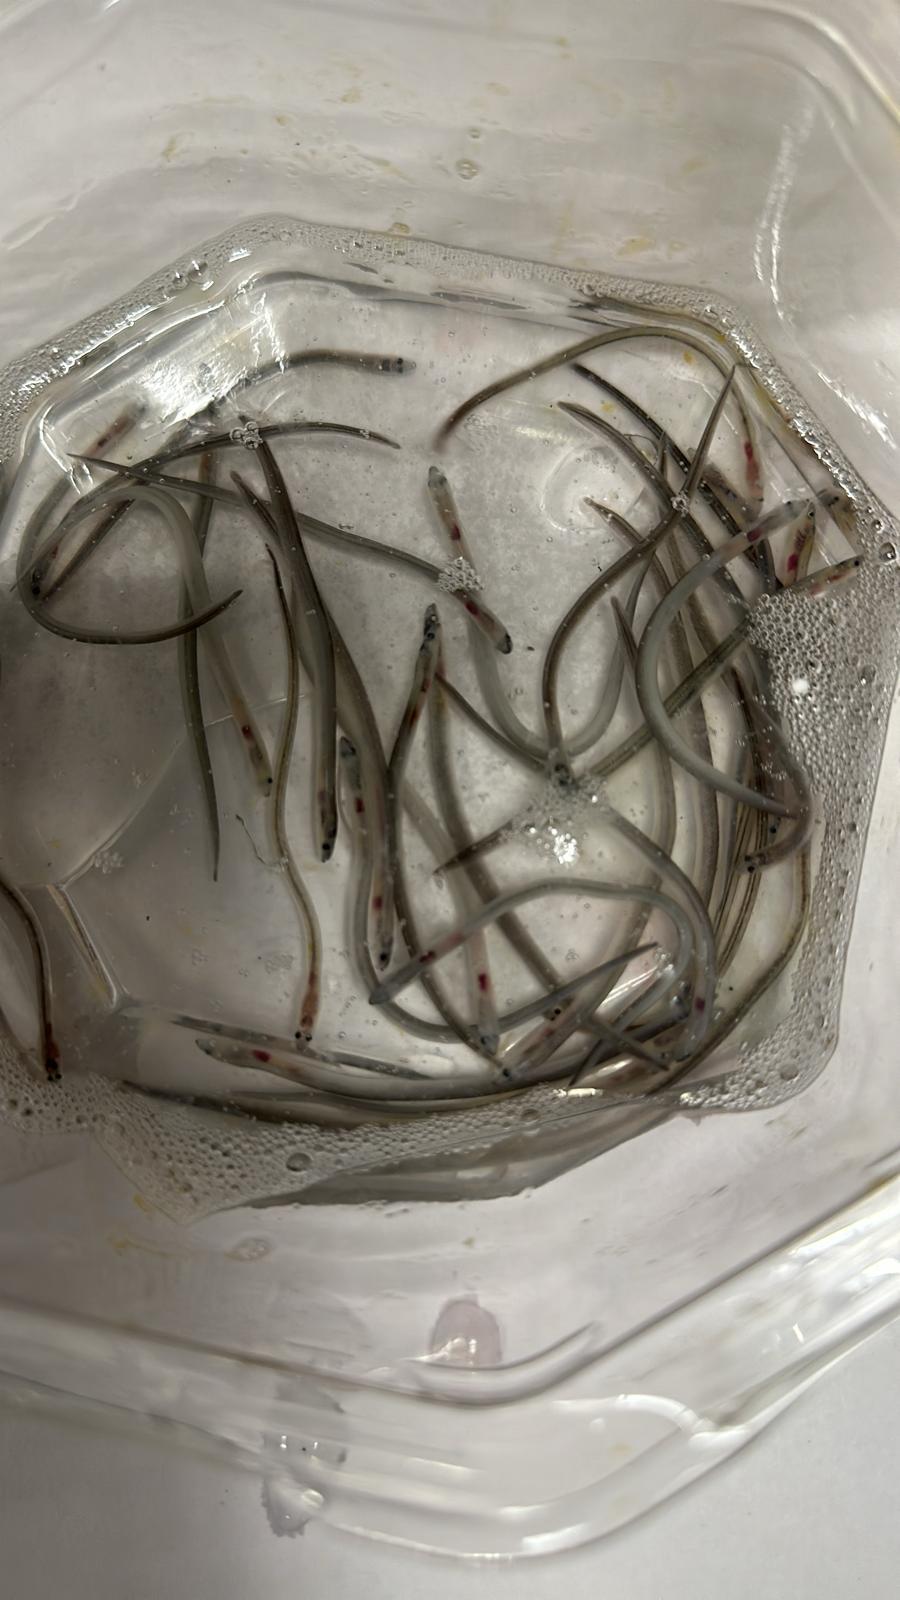 The Agriculture, Fisheries and Conservation Department seized 53 kilograms of eel fry, including that of regulated species at Hong Kong International Airport yesterday (March 14). Photo shows some of the seized European eel fry. 